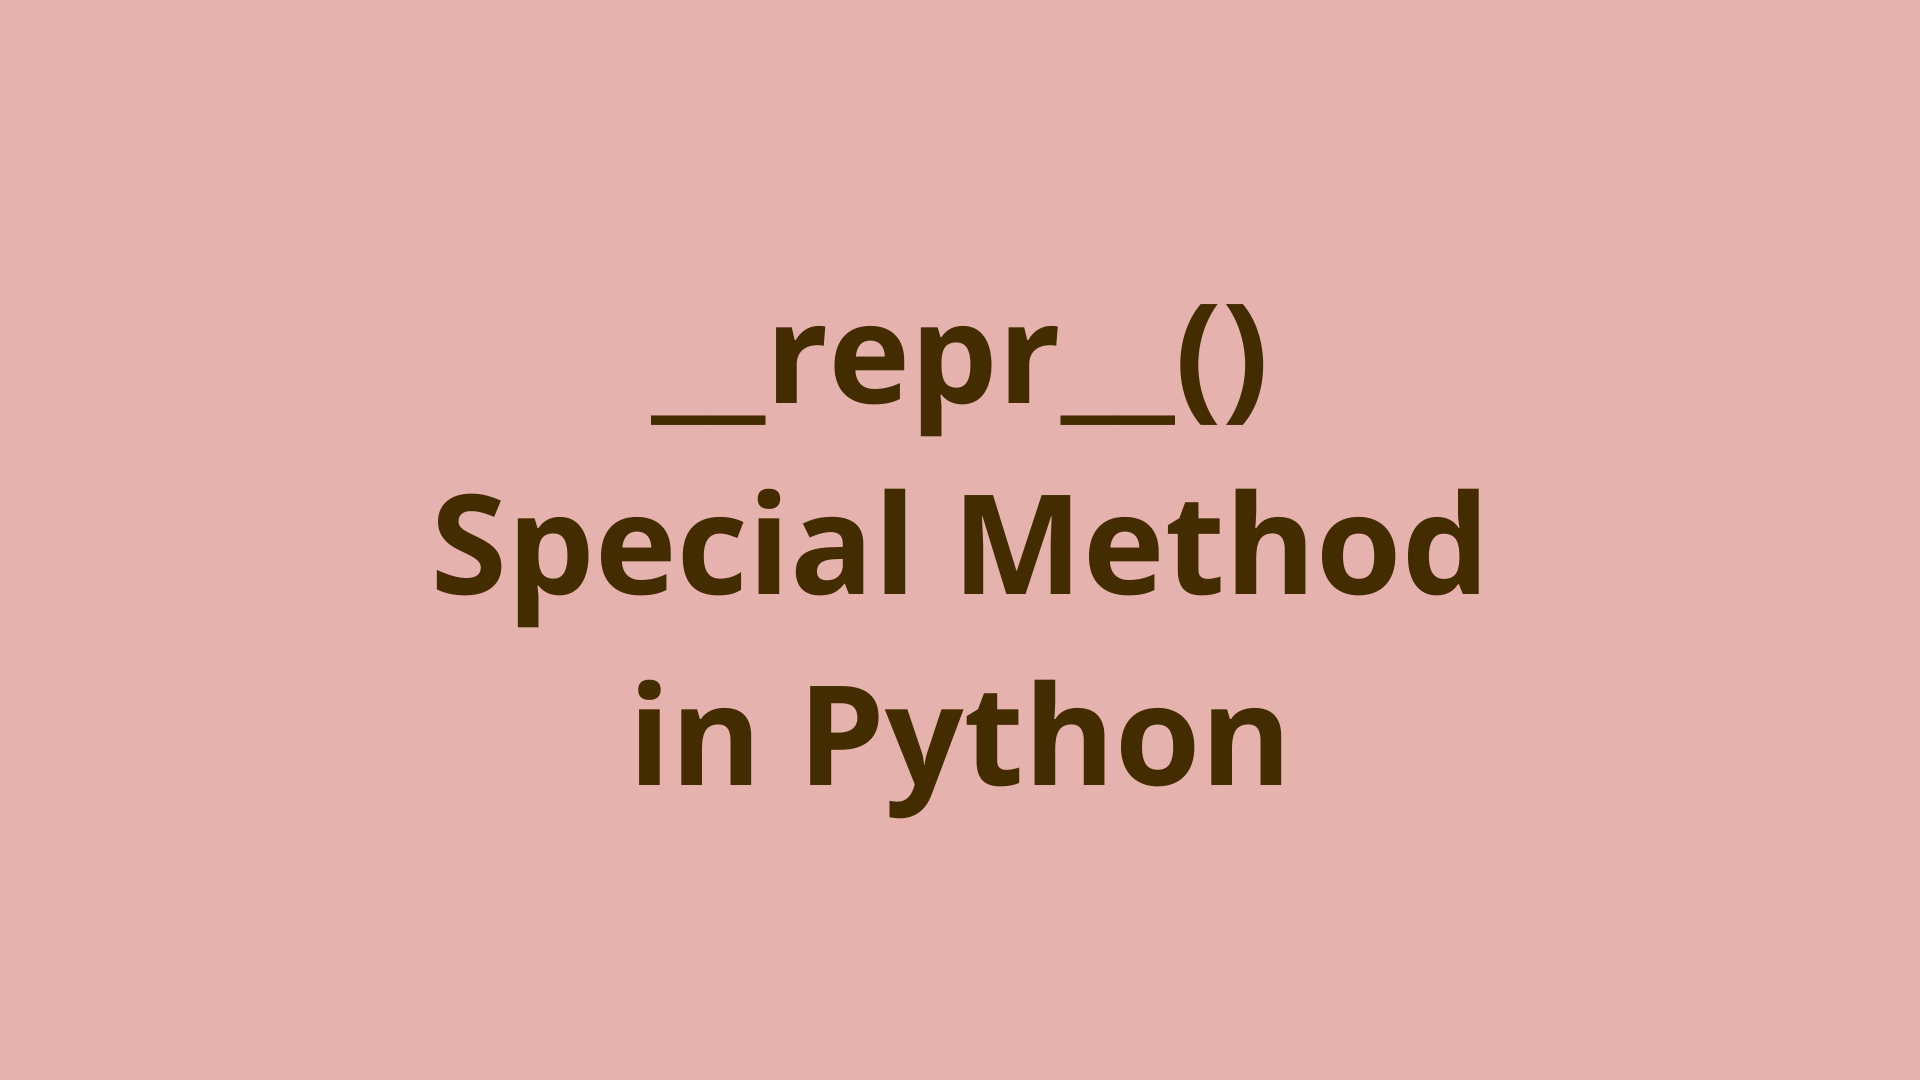 Image of __repr__ in Python